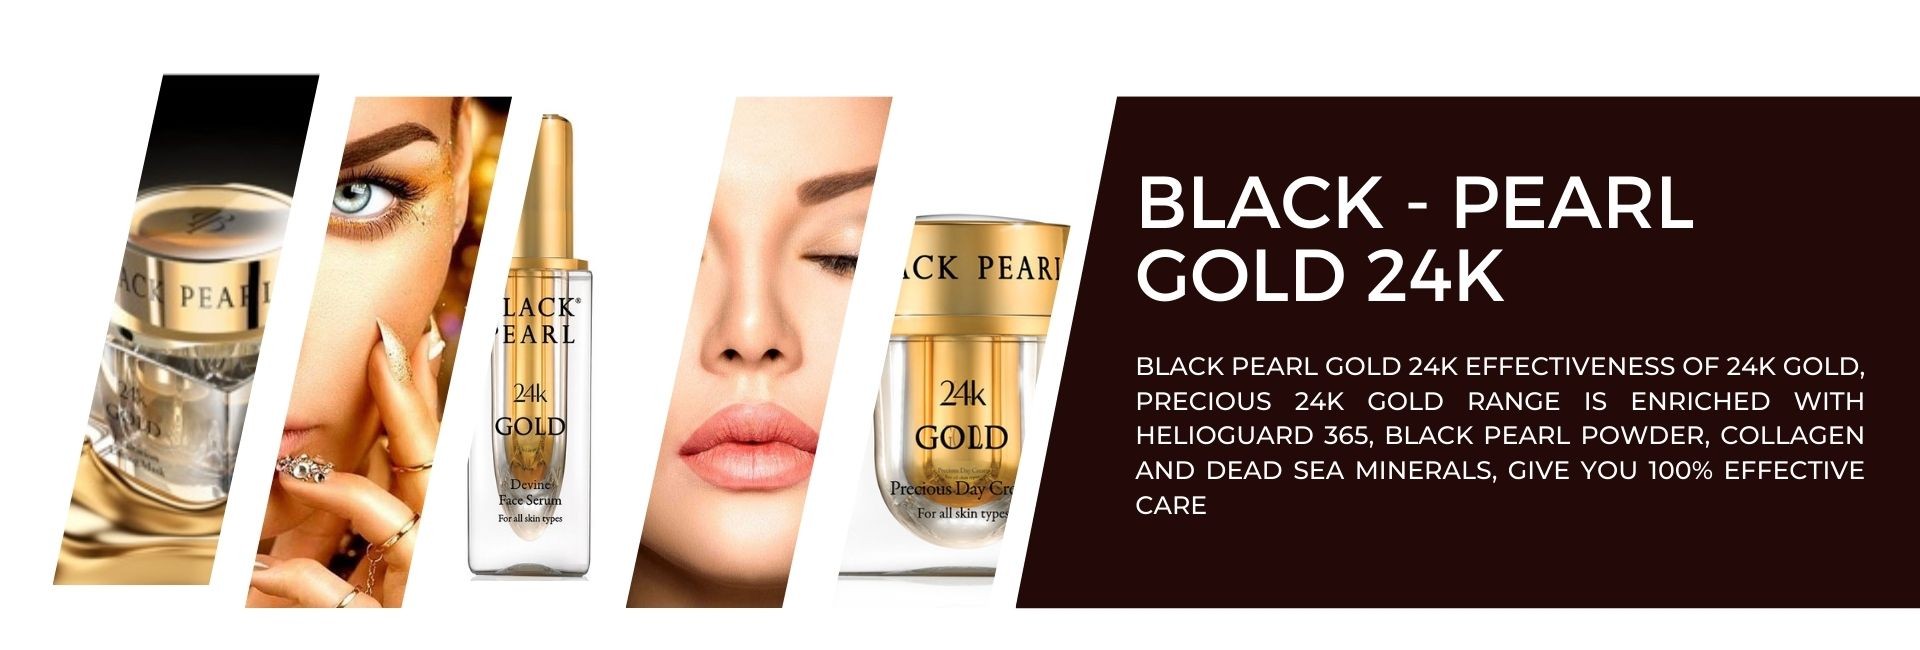 BLACK PEARL GOLD 24K EFFECTIVENESS OF 24K GOLD, PRECIOUS 24K GOLD RANGE IS ENRICHED WITH HELIOGUARD 365, BLACK PEARL POWDER, COLLAGEN AND DEAD SEA MINERALS, GIVE YOU 100% EFFECTIVE CARE